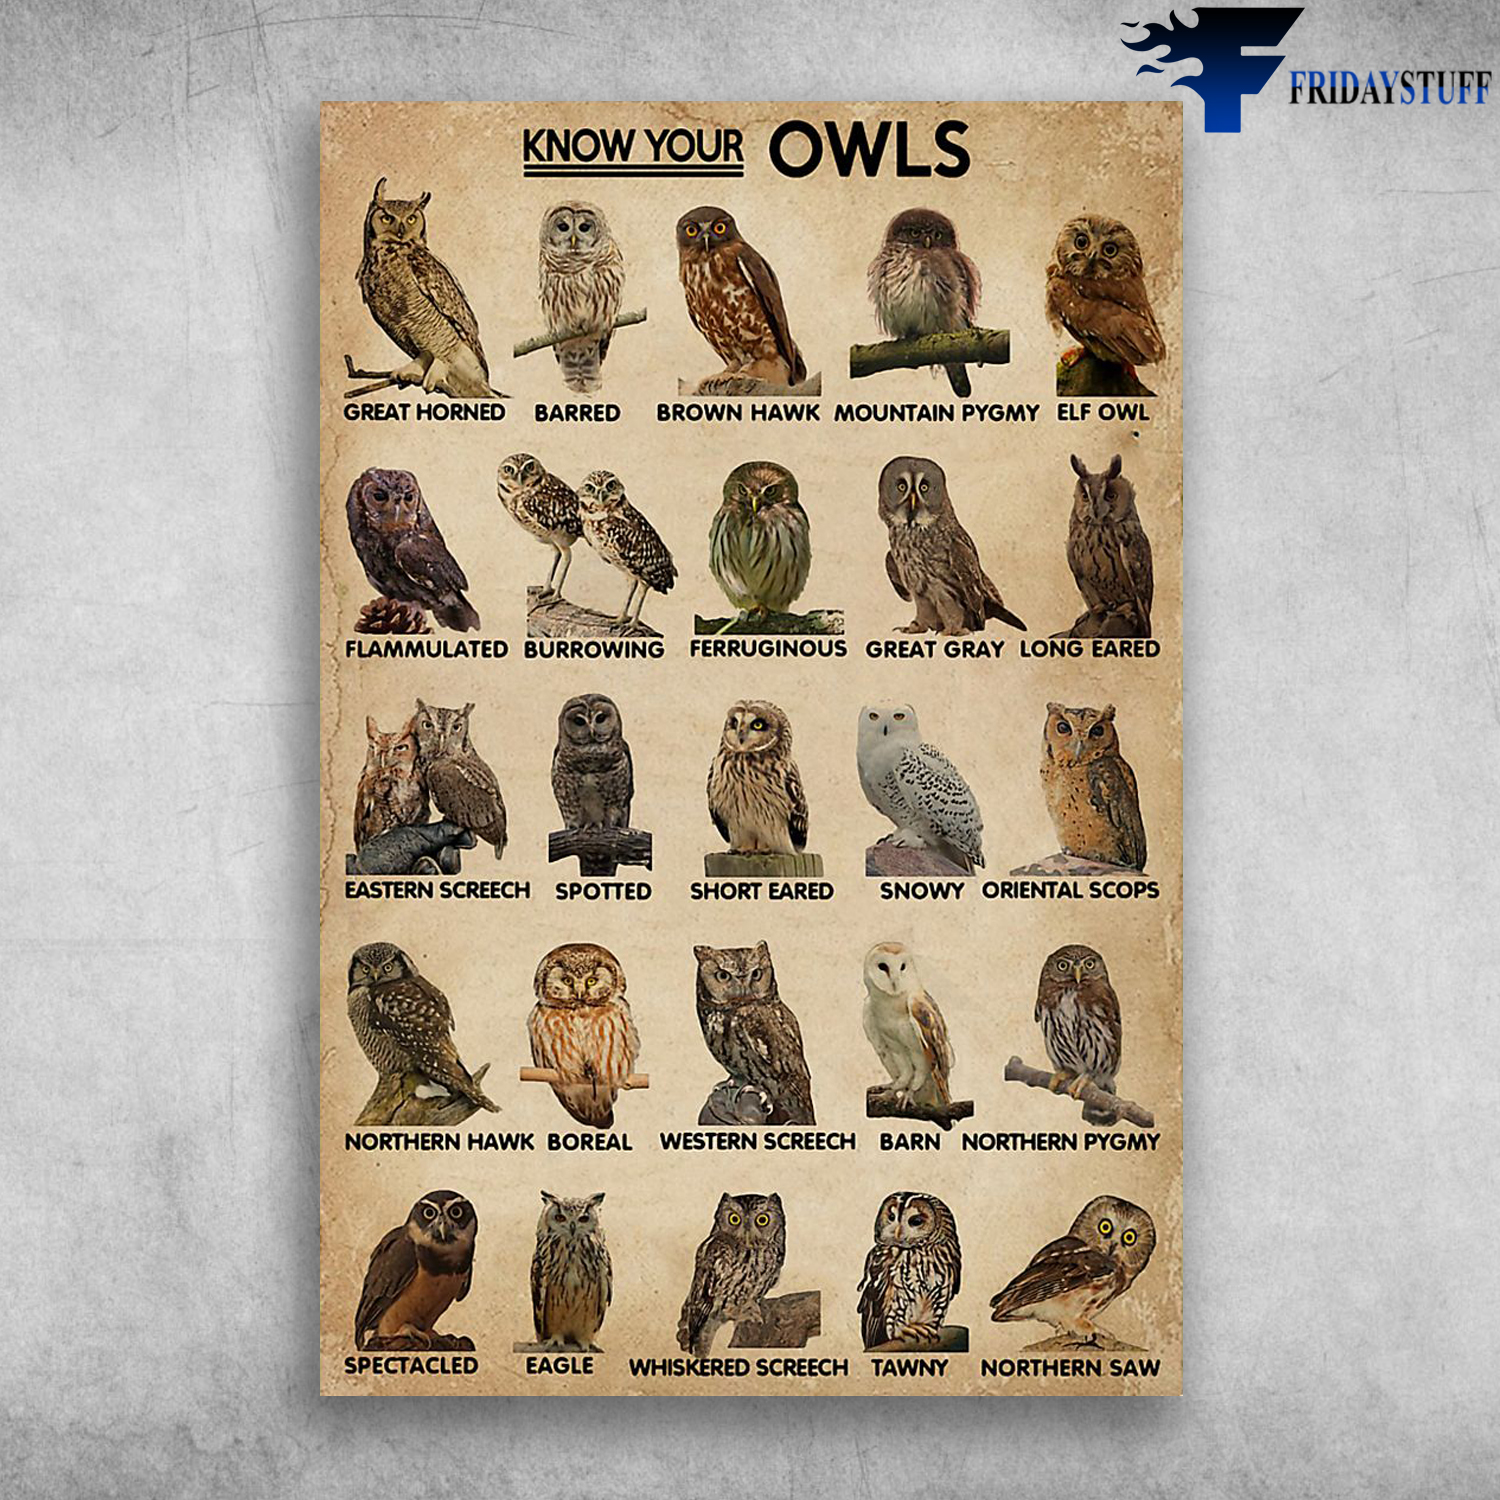 Know Your Owls Great Horned Owl Barred Owl